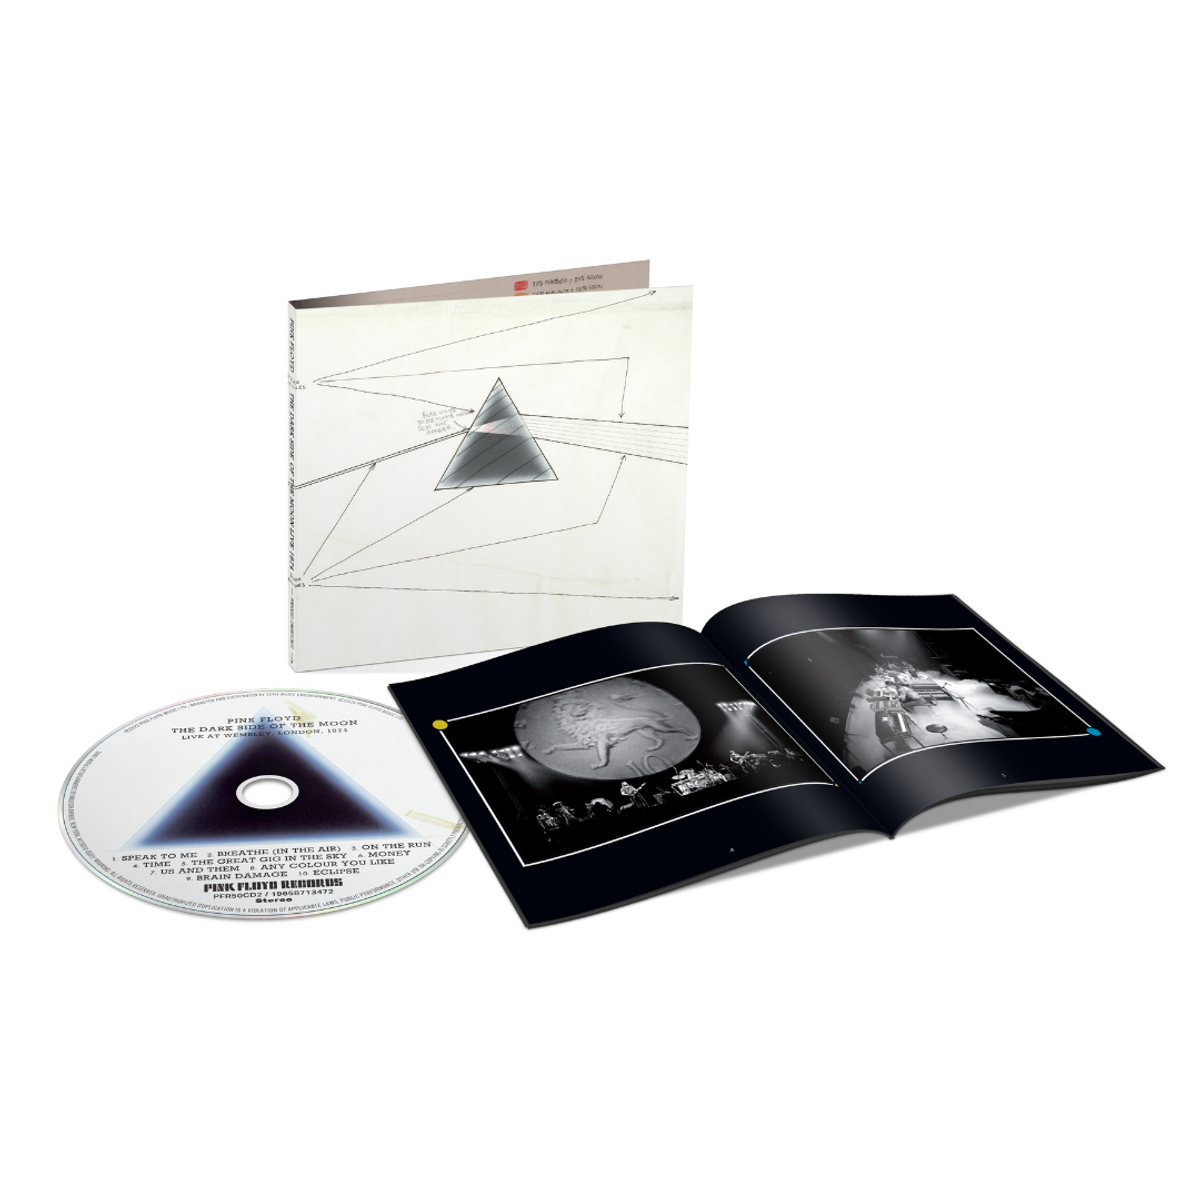 CD Shop - PINK FLOYD THE DARK SIDE OF THE MOON LIVE AT WEMBLEY 1974